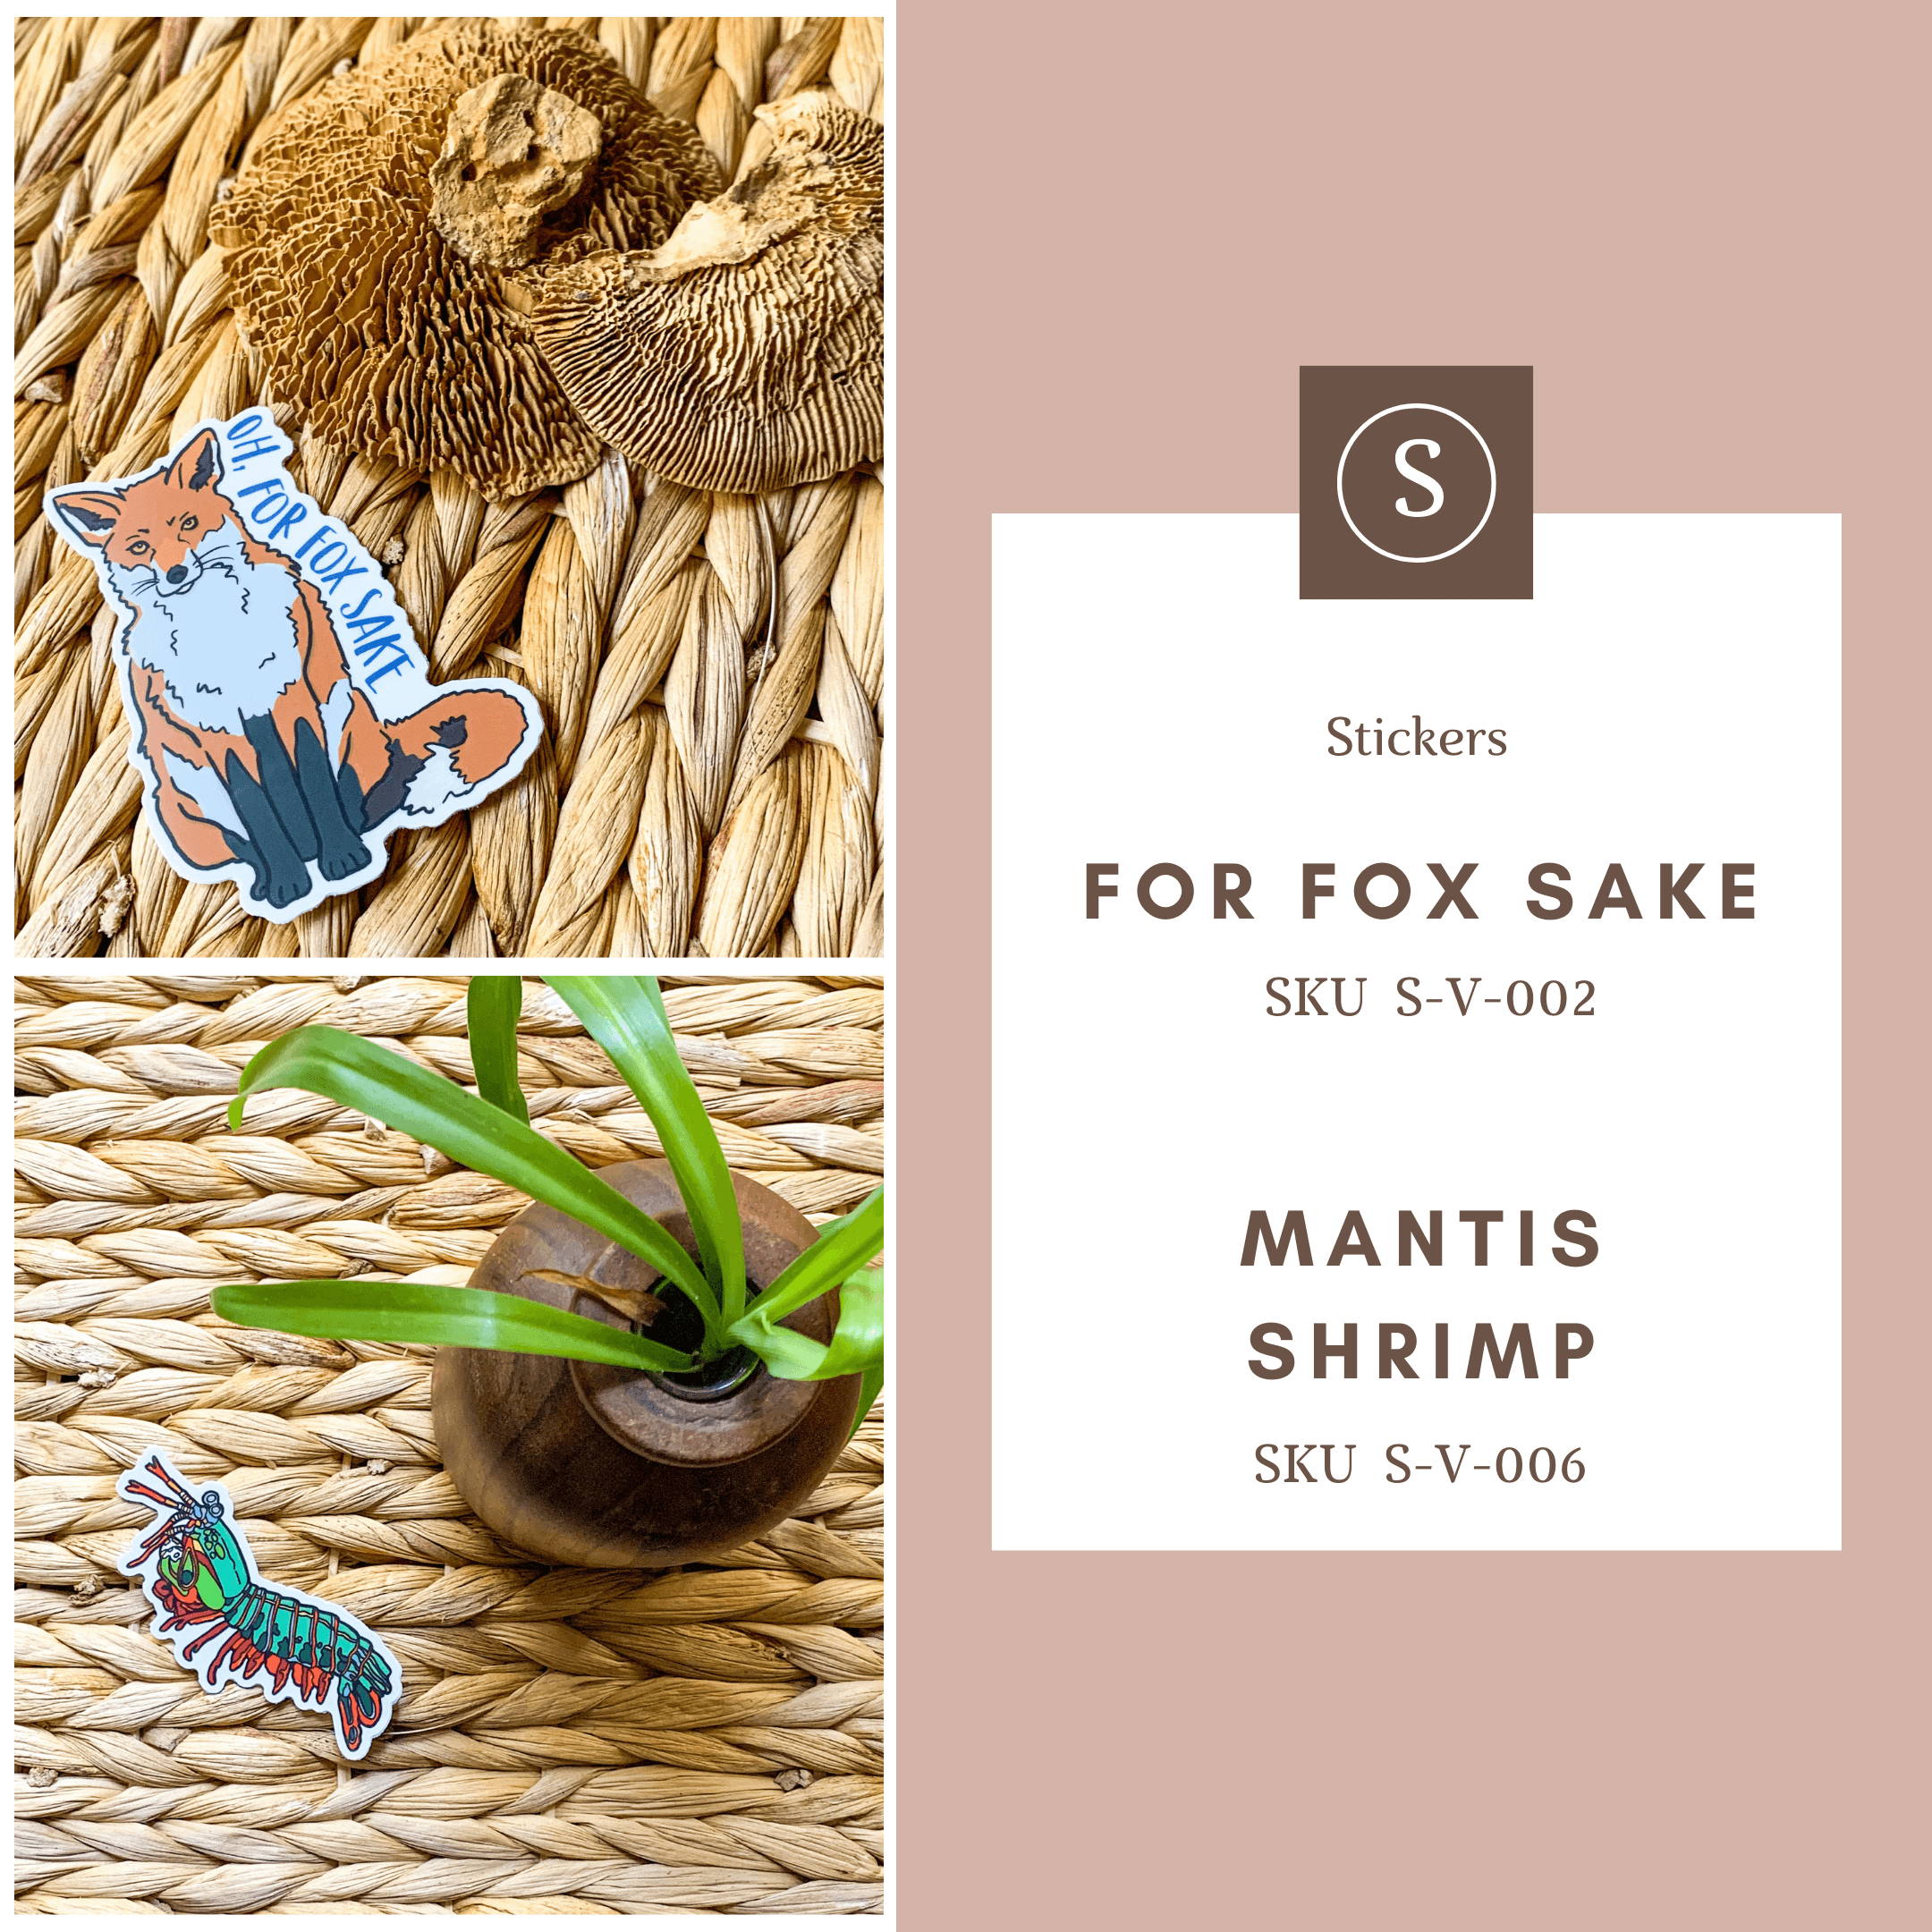 Best selling stickers on a grass mat backgrount with a small plant in a wood vase and a couple dried mushroom decor. The top is the For Fox Sake sticker of a red fox with the text "Oh, For Fox Sake" along the side SKU S-V-002 and the bottom is a very colorful peacock mantis shrimp SKU S-V-006